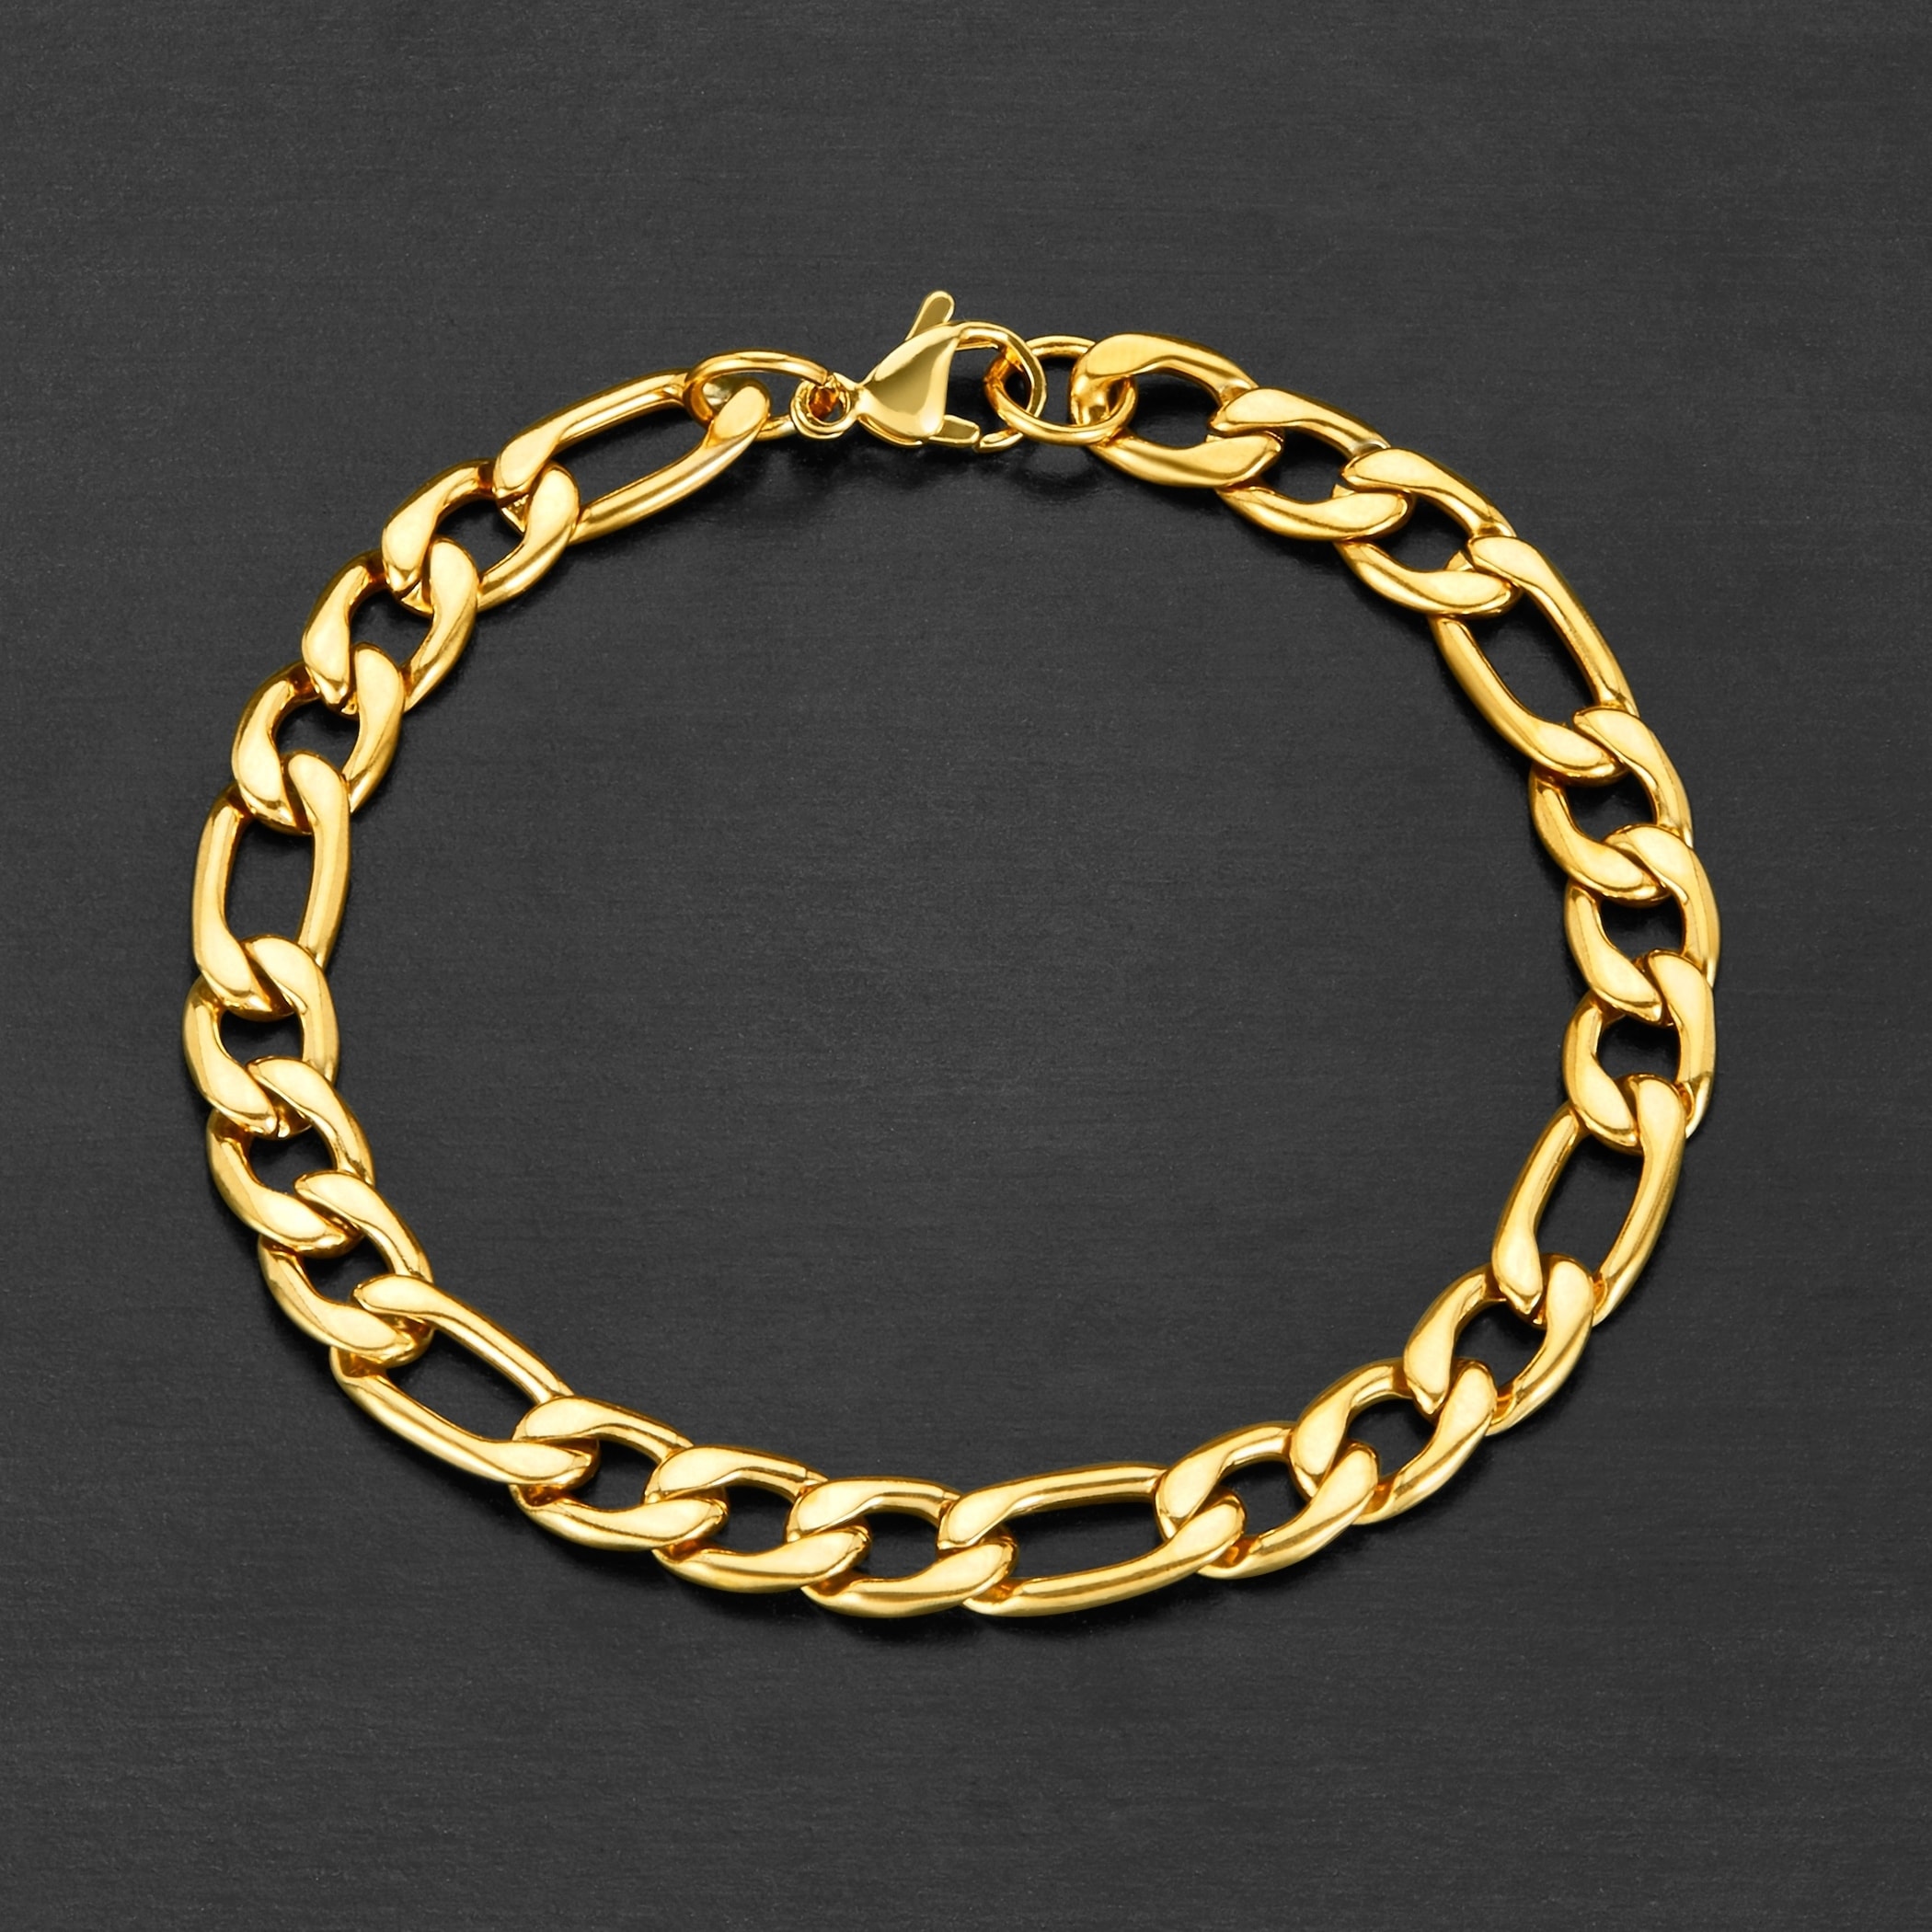 Details about   5mm 9 Inch Long Stainless Steel Figaro Chain Bracelet Quality Bracelets 9" B10